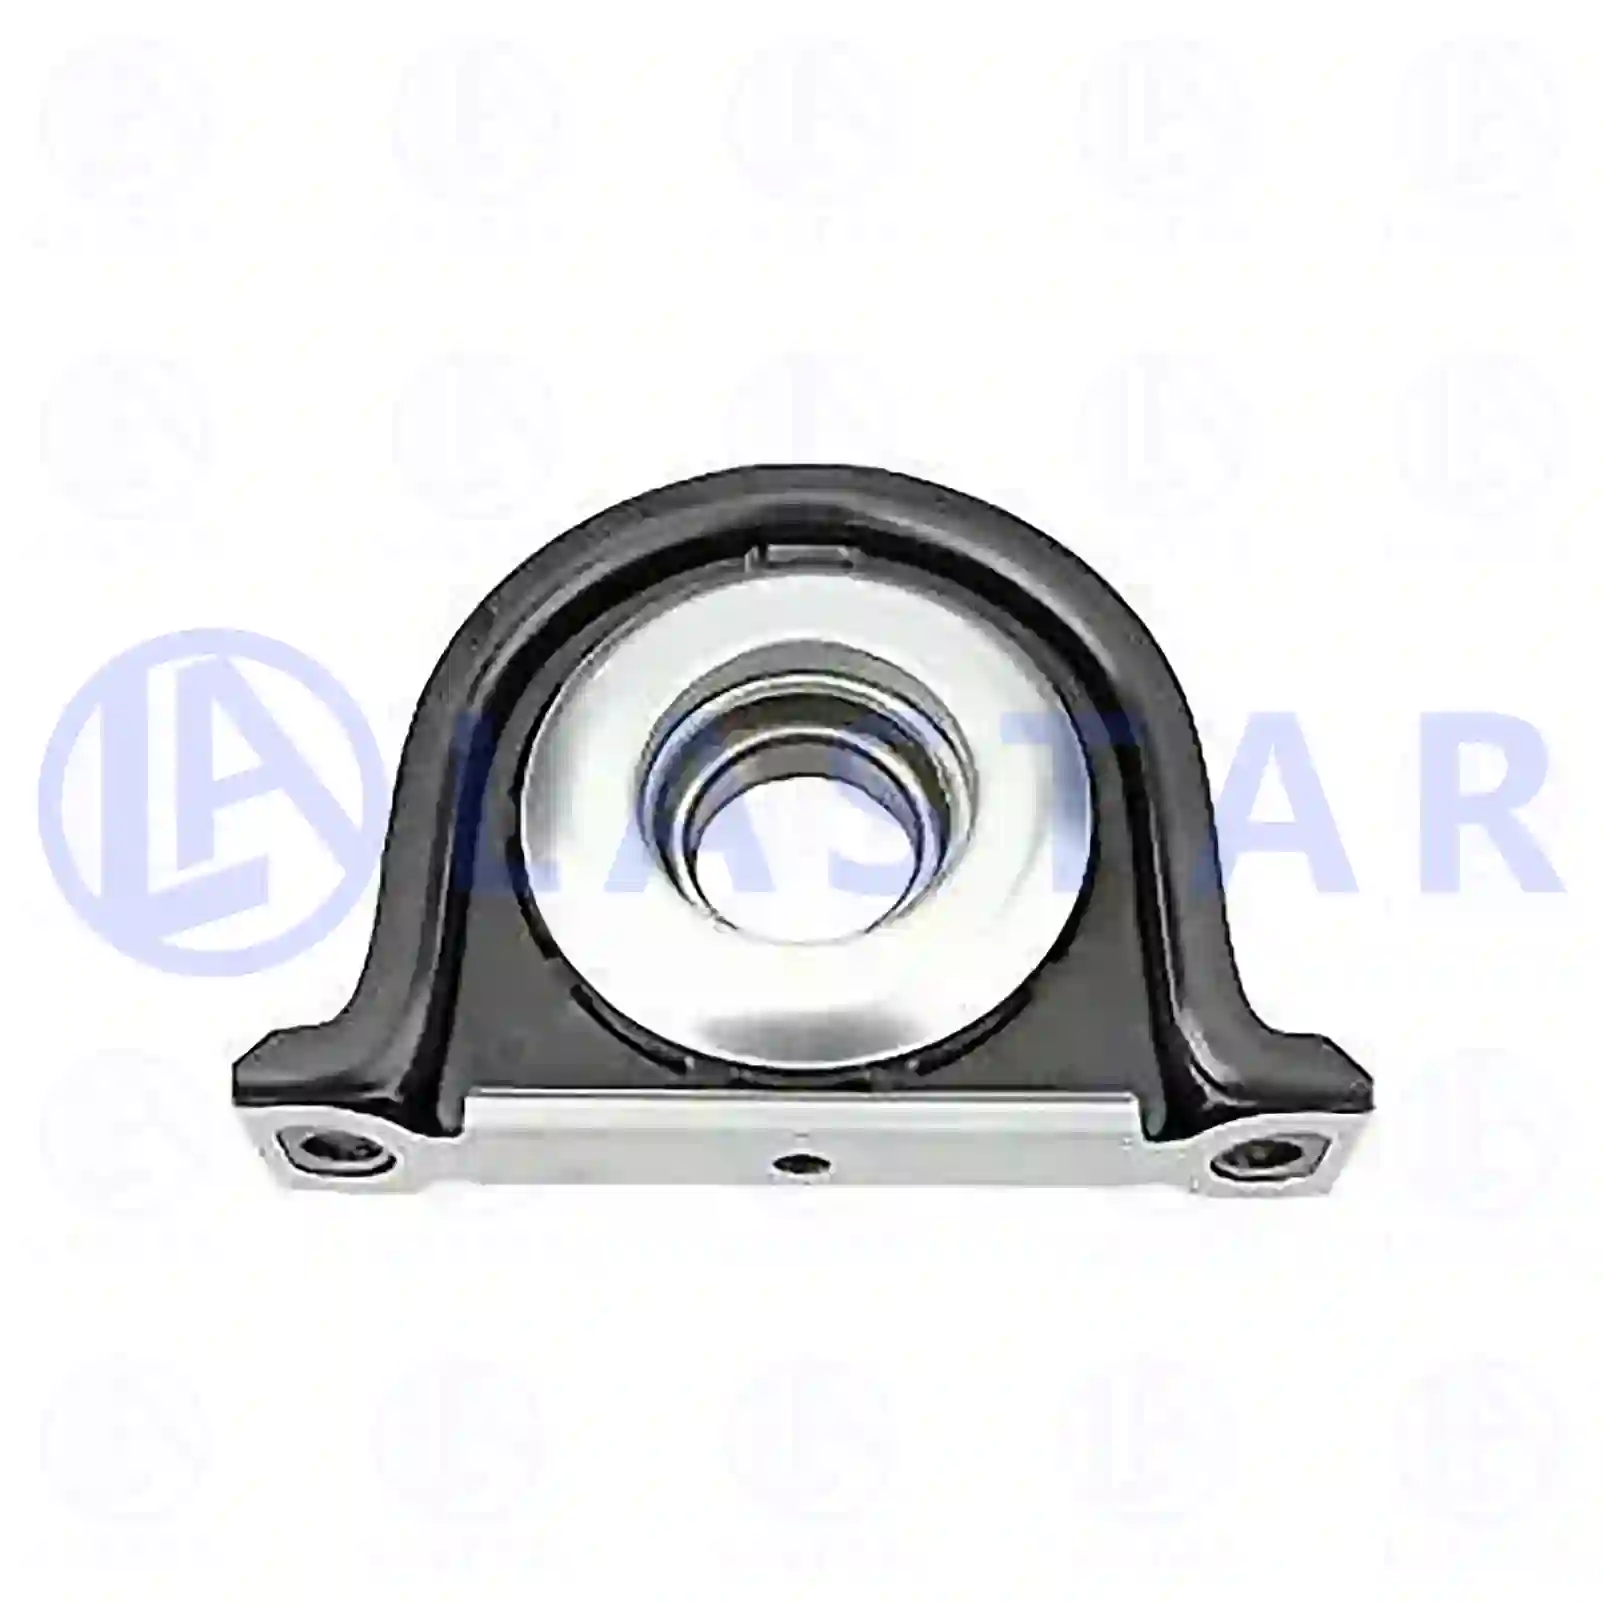 Center bearing, 77734320, 5000589888 ||  77734320 Lastar Spare Part | Truck Spare Parts, Auotomotive Spare Parts Center bearing, 77734320, 5000589888 ||  77734320 Lastar Spare Part | Truck Spare Parts, Auotomotive Spare Parts